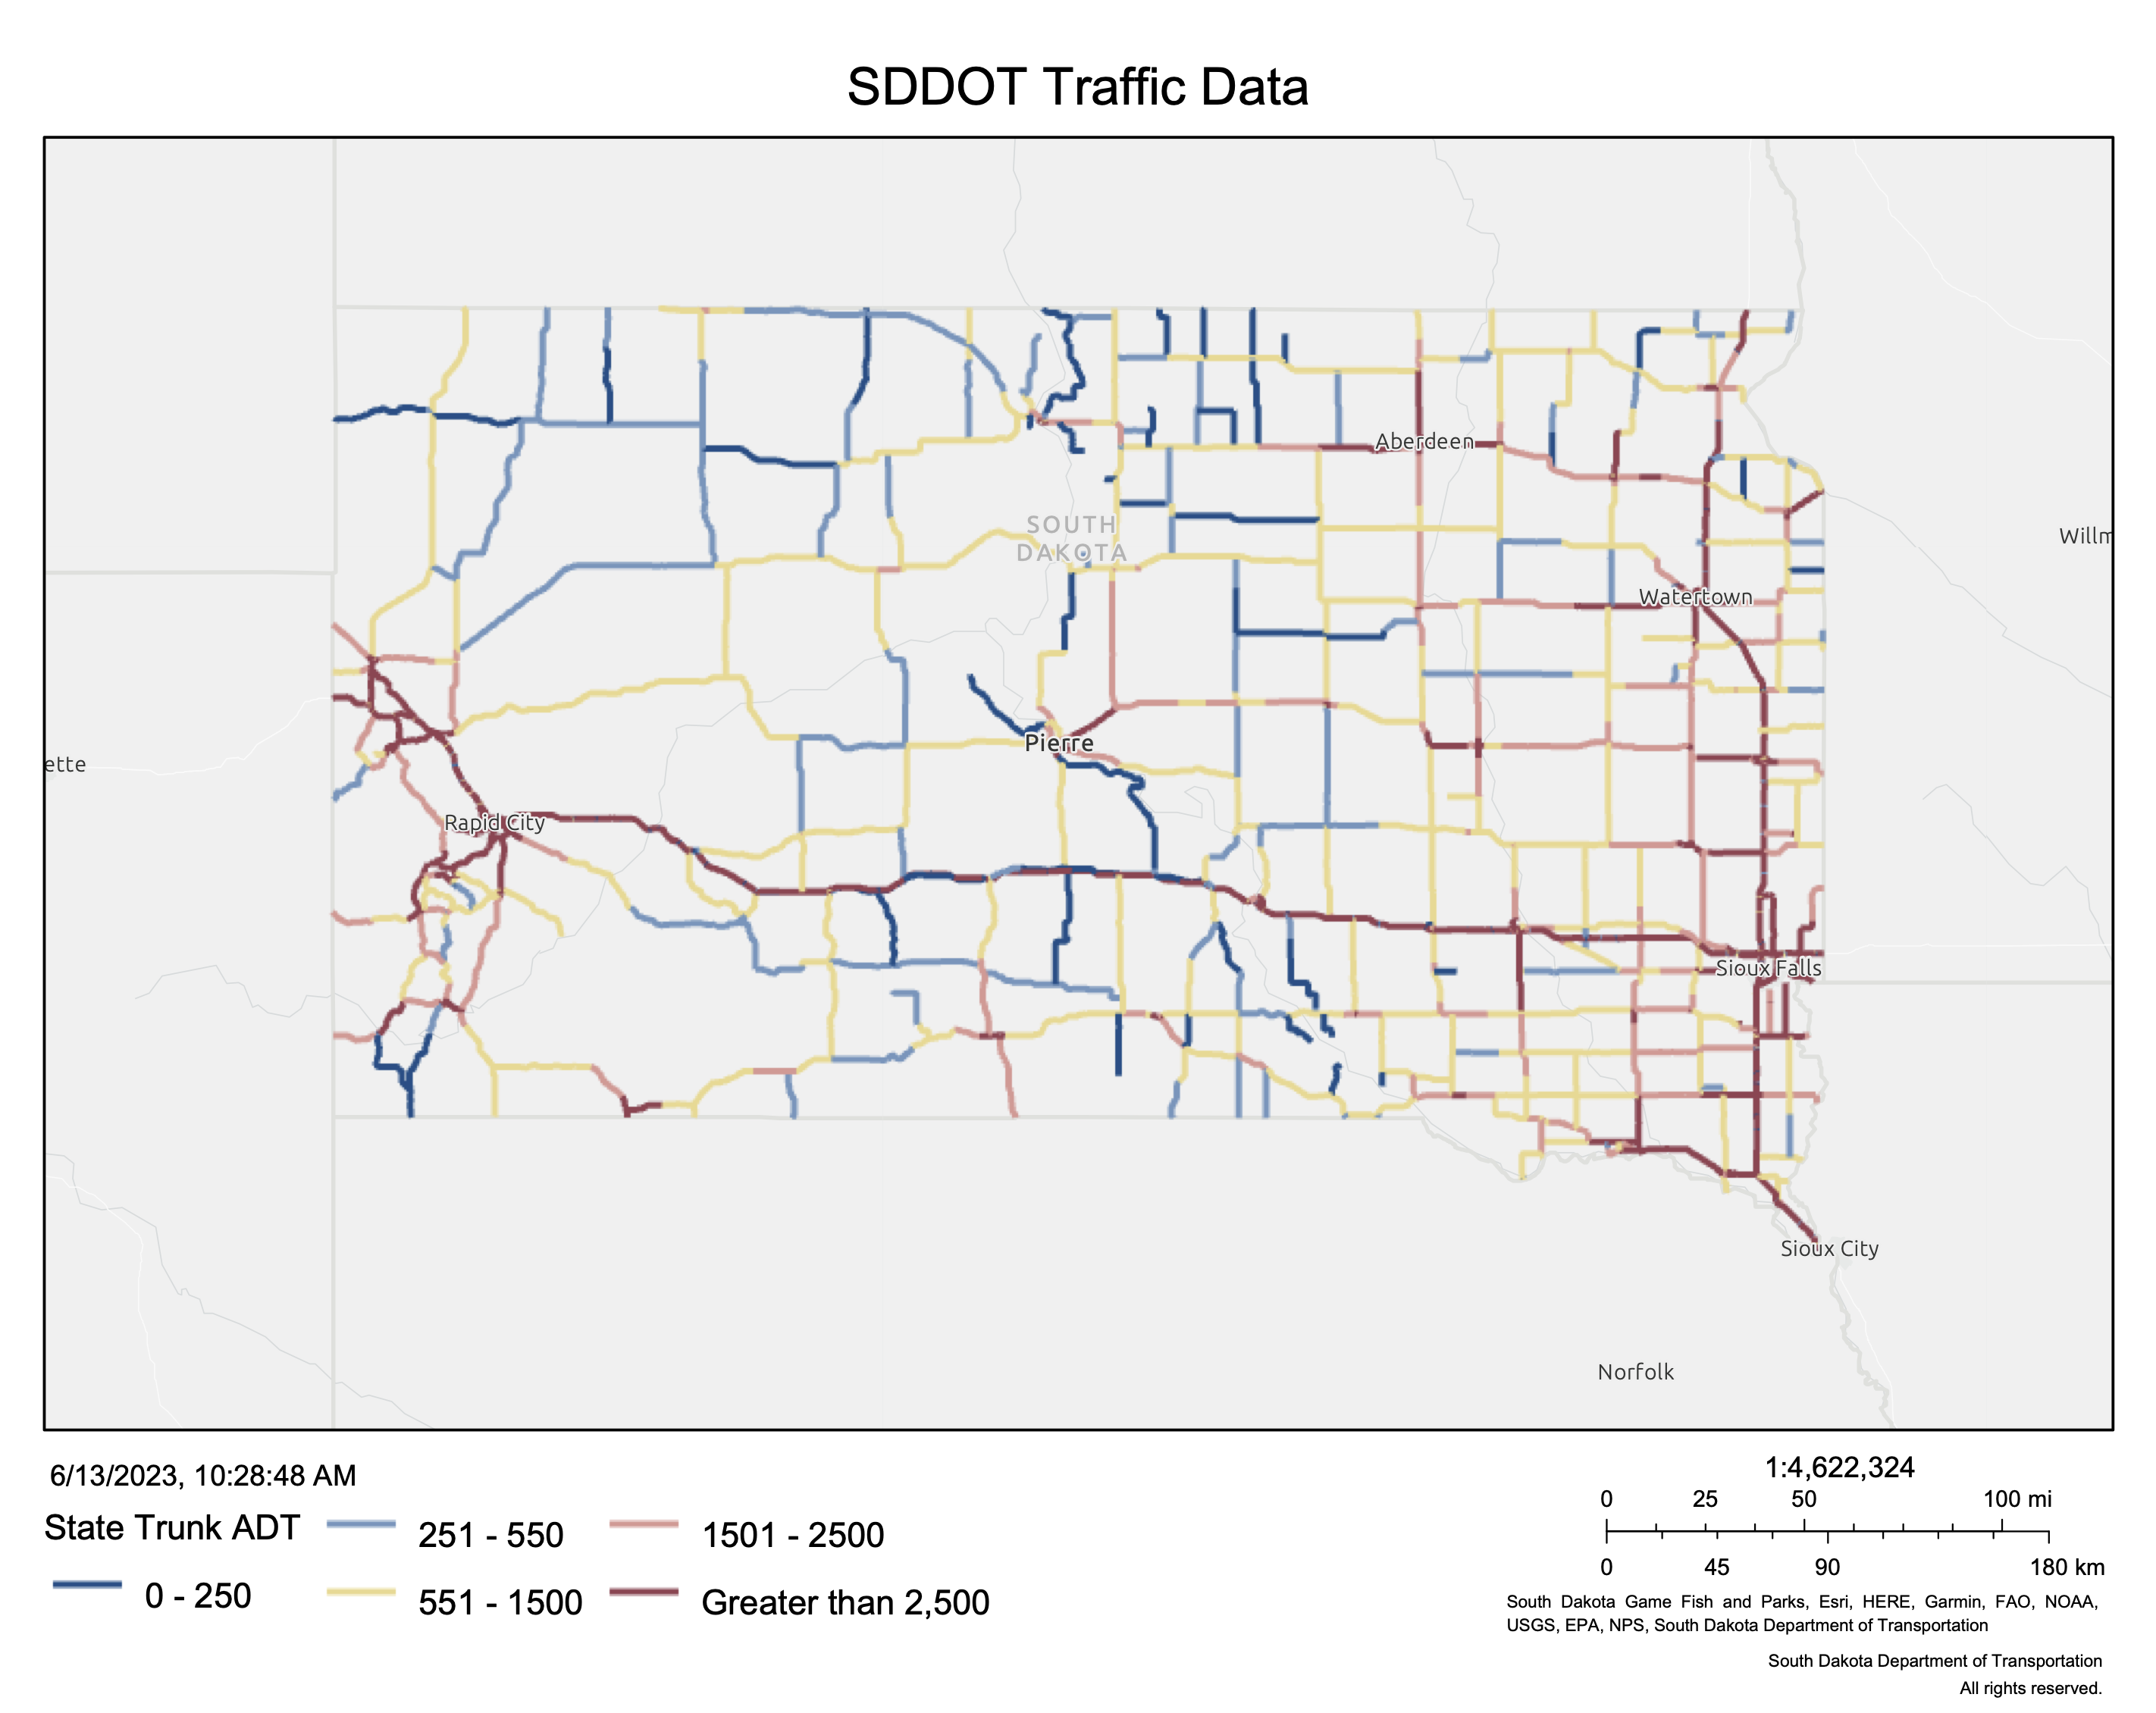 SDDOT Taking Public Comment on Proposed Road Projects for 2024–2027